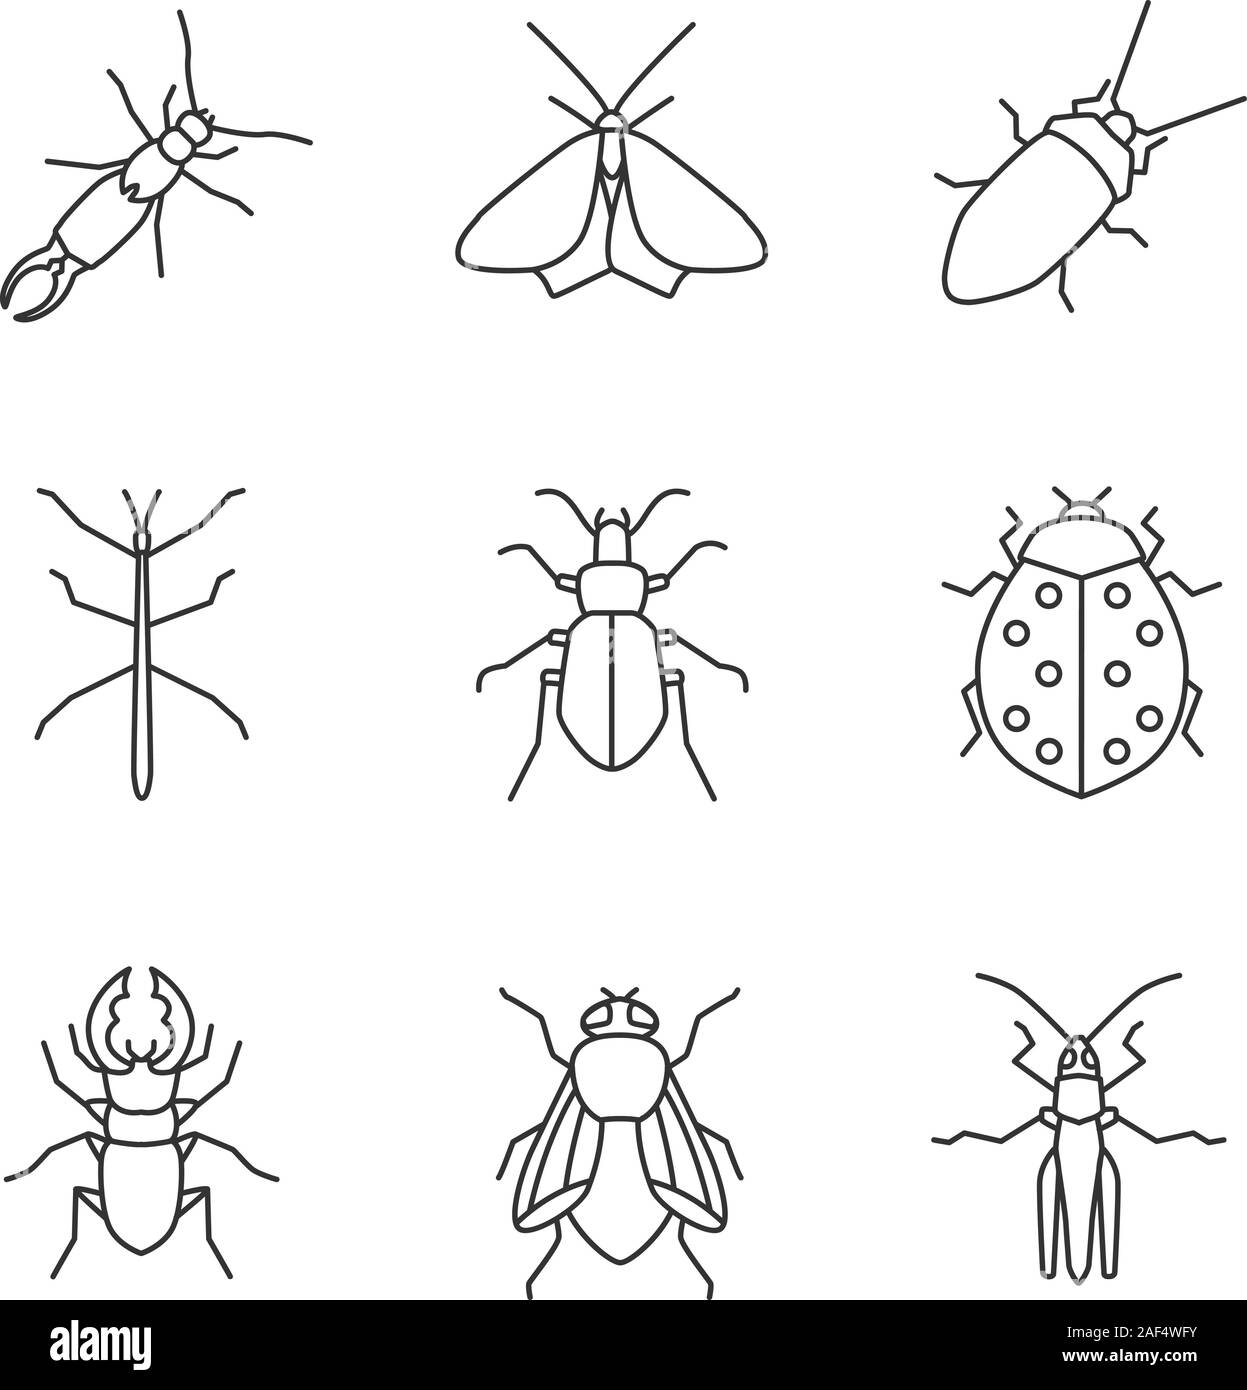 Insects linear icons set. Earwig, moth, cockroach, stick bug, ground and stag beetles, ladybug, housefly, grasshopper. Thin line contour symbols. Isol Stock Vector